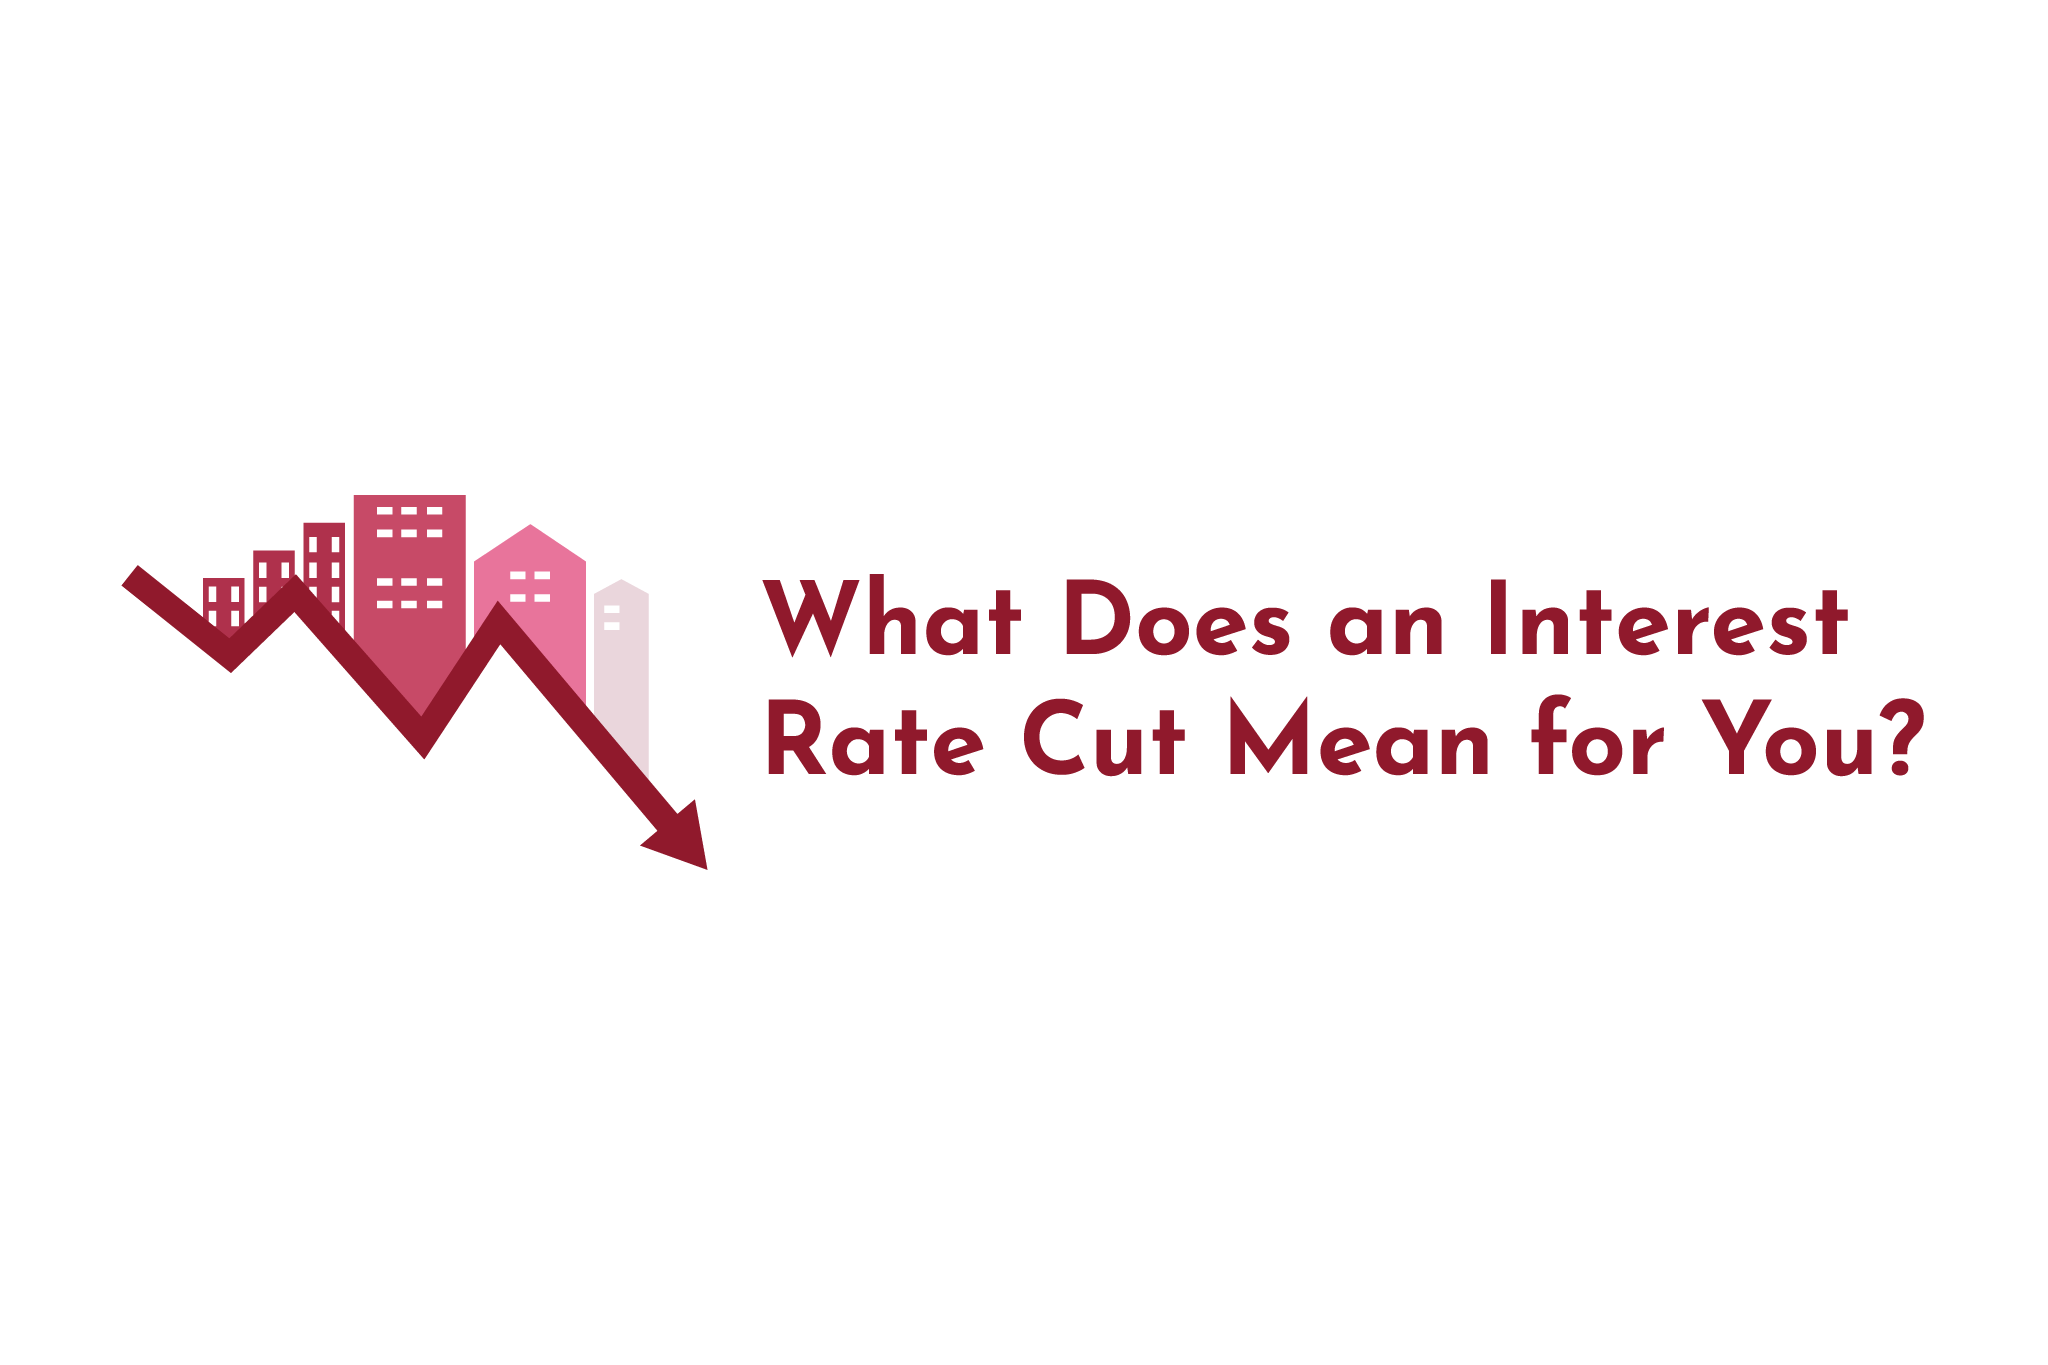 How does the interest rate cut affect you?